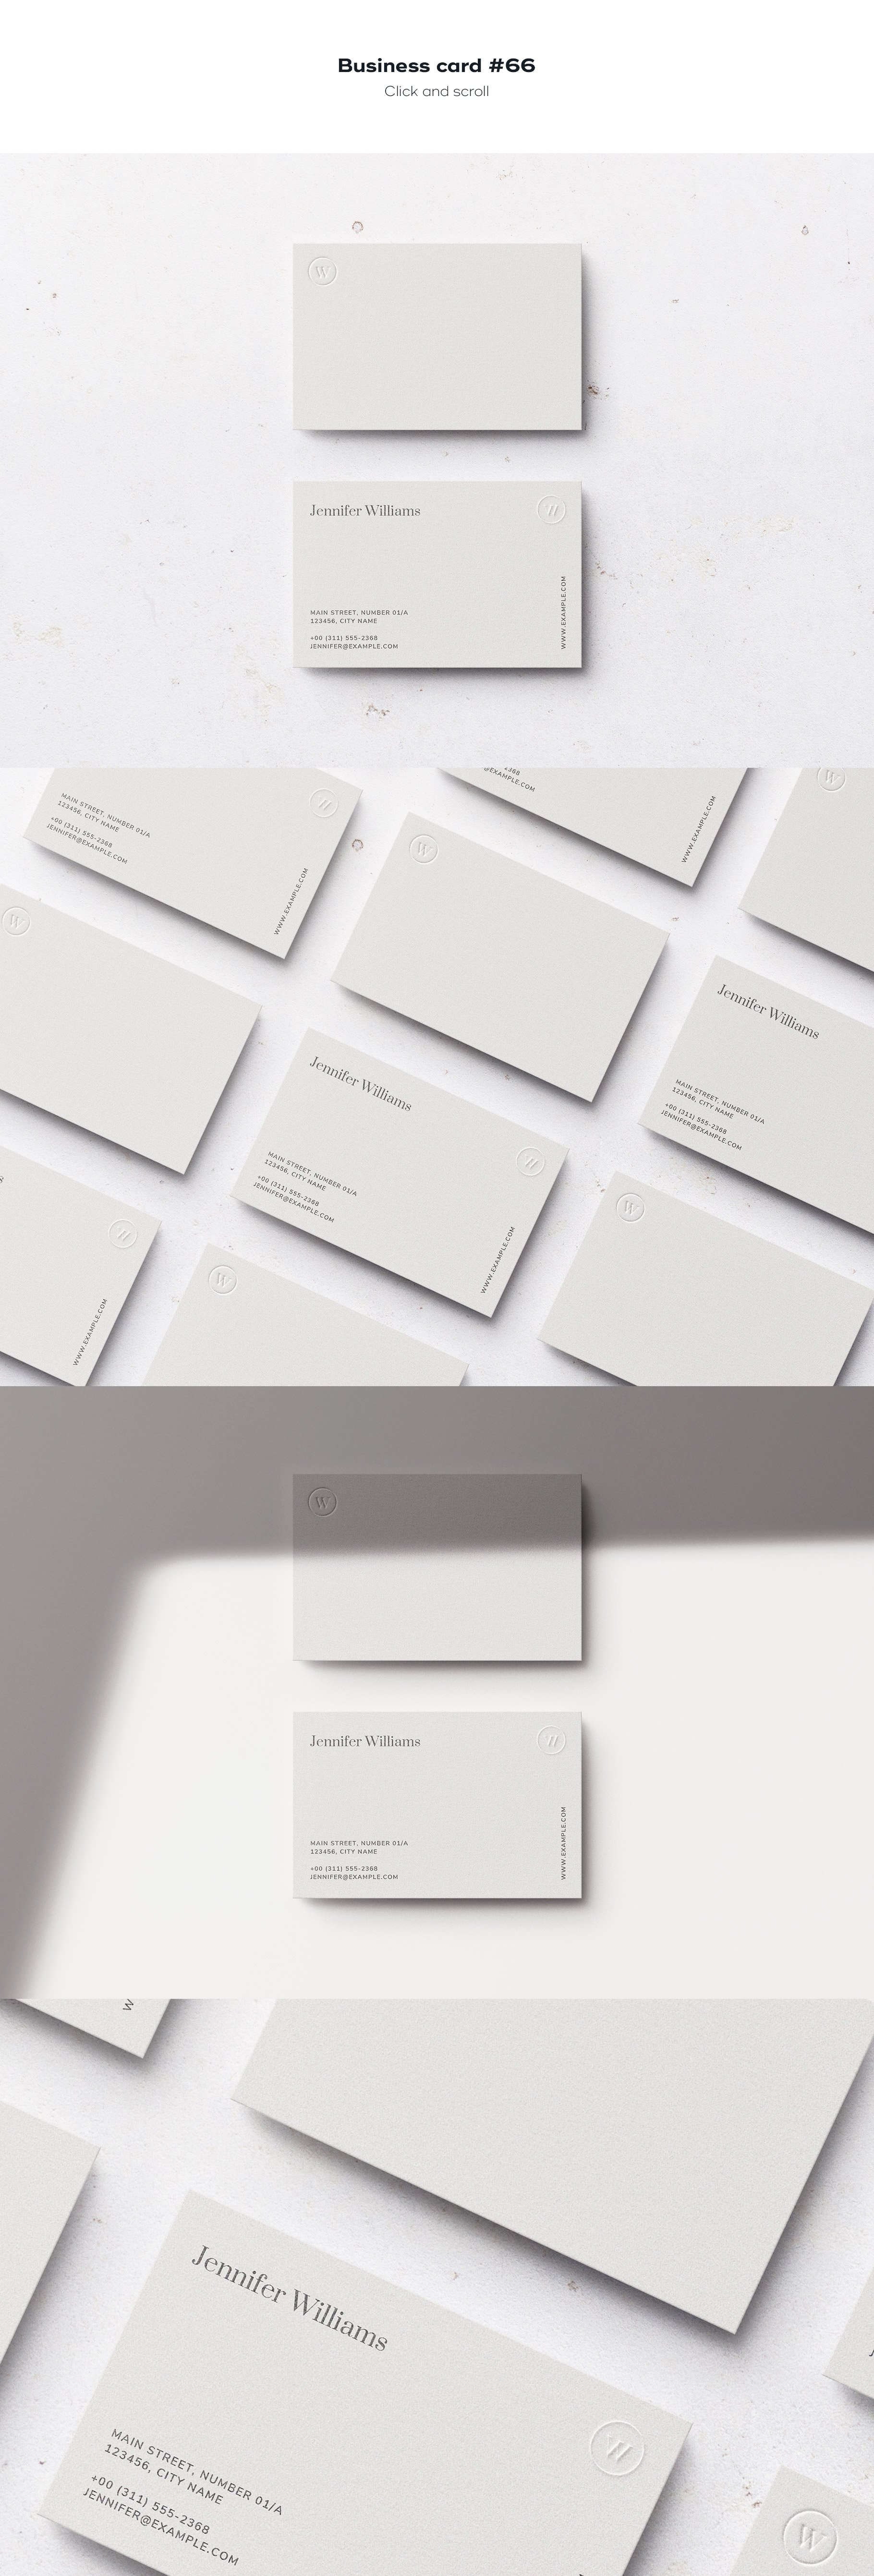 business card 66 836